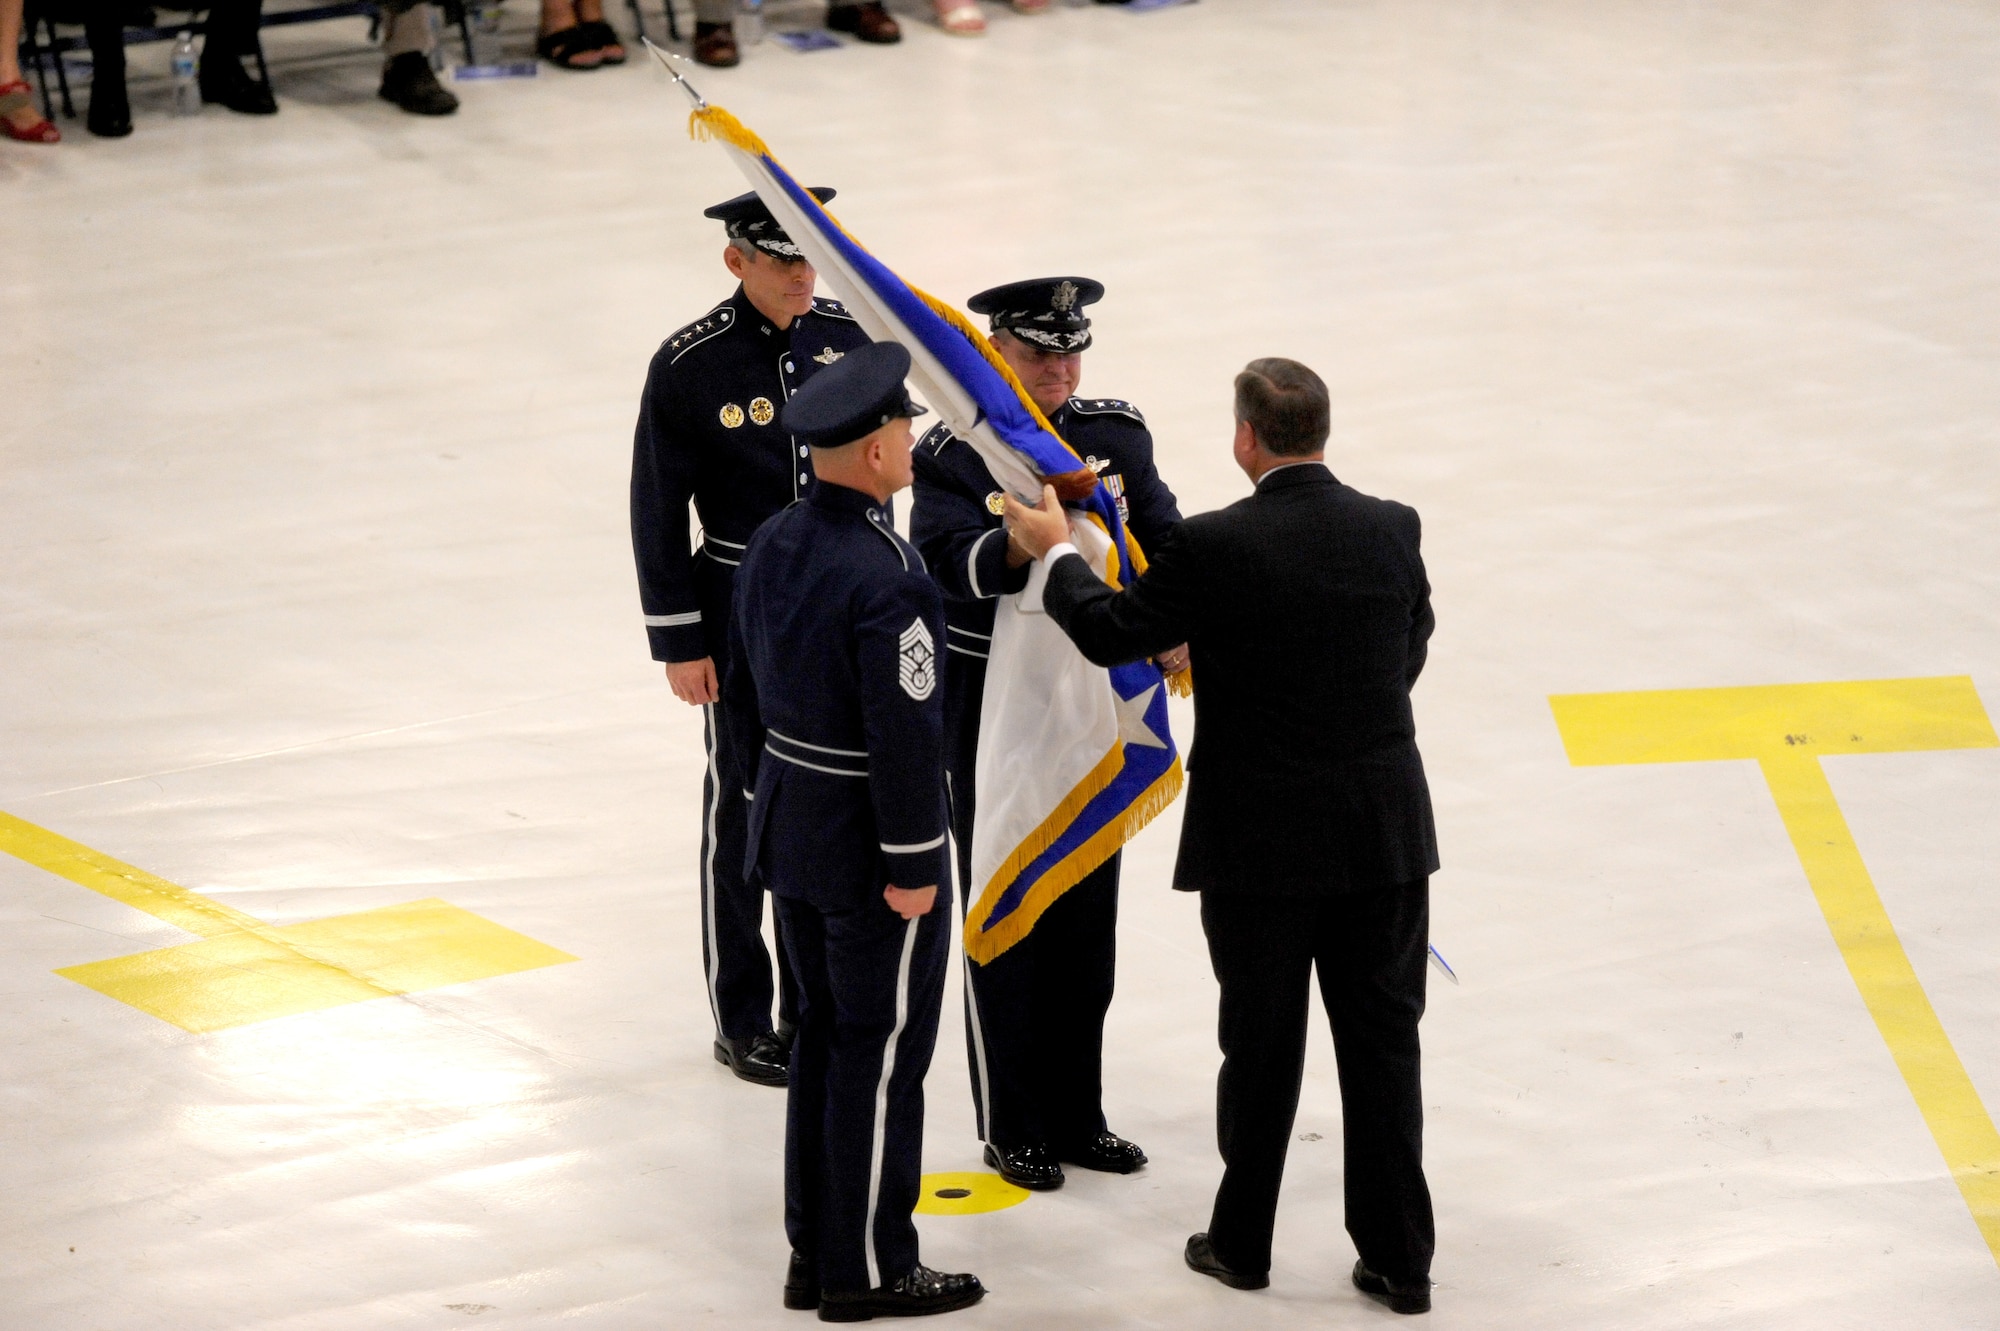 Secretary of the Air Force Michael Donley passes the chief of staff flag to Gen. Mark A. Welsh III during a ceremony at Joint Base Andrews, Md., Aug. 10, 2012. Prior to his new position, Welsh was the commander of U.S. Air Forces in Europe. (U.S. Air Force photo/Master Sgt. Cecilio Ricardo)